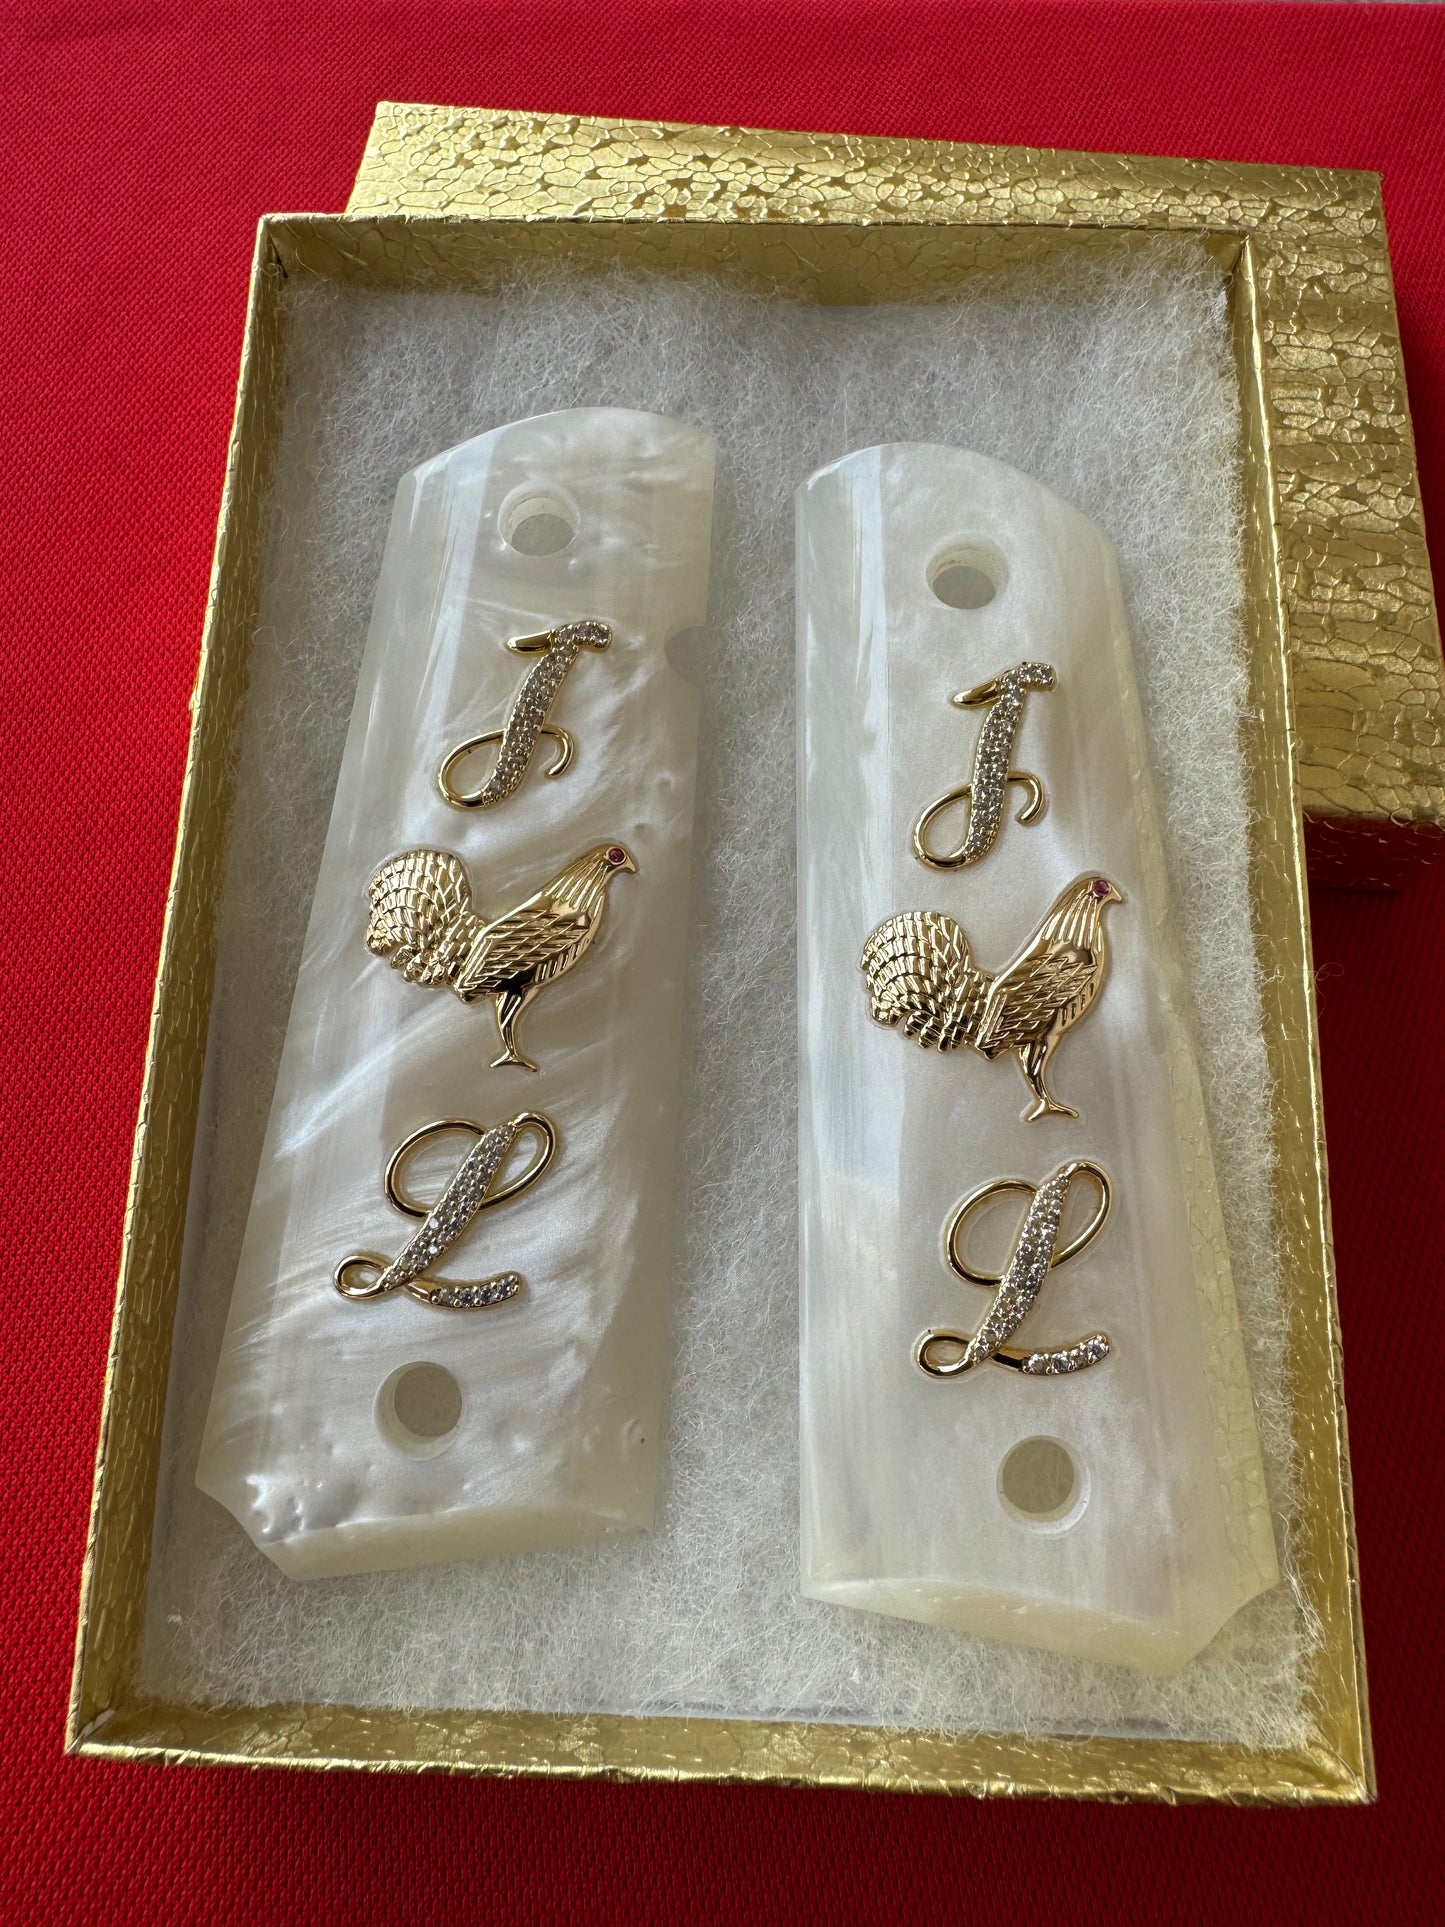 1911 "Rooster" “I”  “L” 24k Gold Plated Inlayed CZ stones Grips  White Pearl Grips